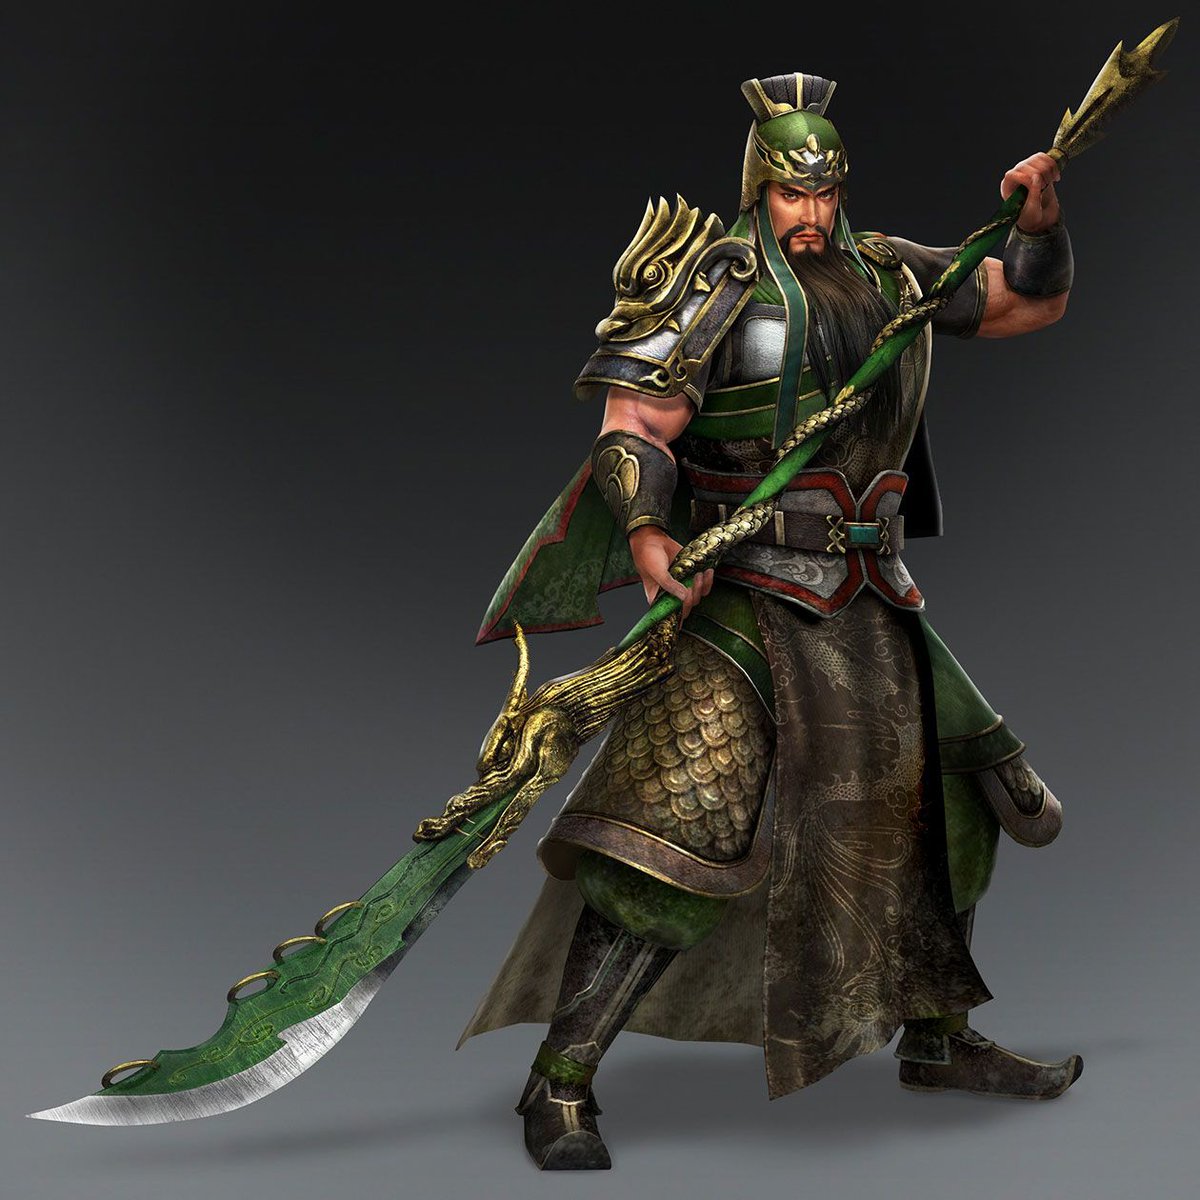 Guan YuThe God Of War And Also Commerce (?) and still worshipped today. One of Liu Bei's sworn brothers. Cao Cao is hot for him and gave him Lu Bu's rad pony and a silk beard to keep his beard in. Honestly he's a kind of boring character but the beard IS epic.